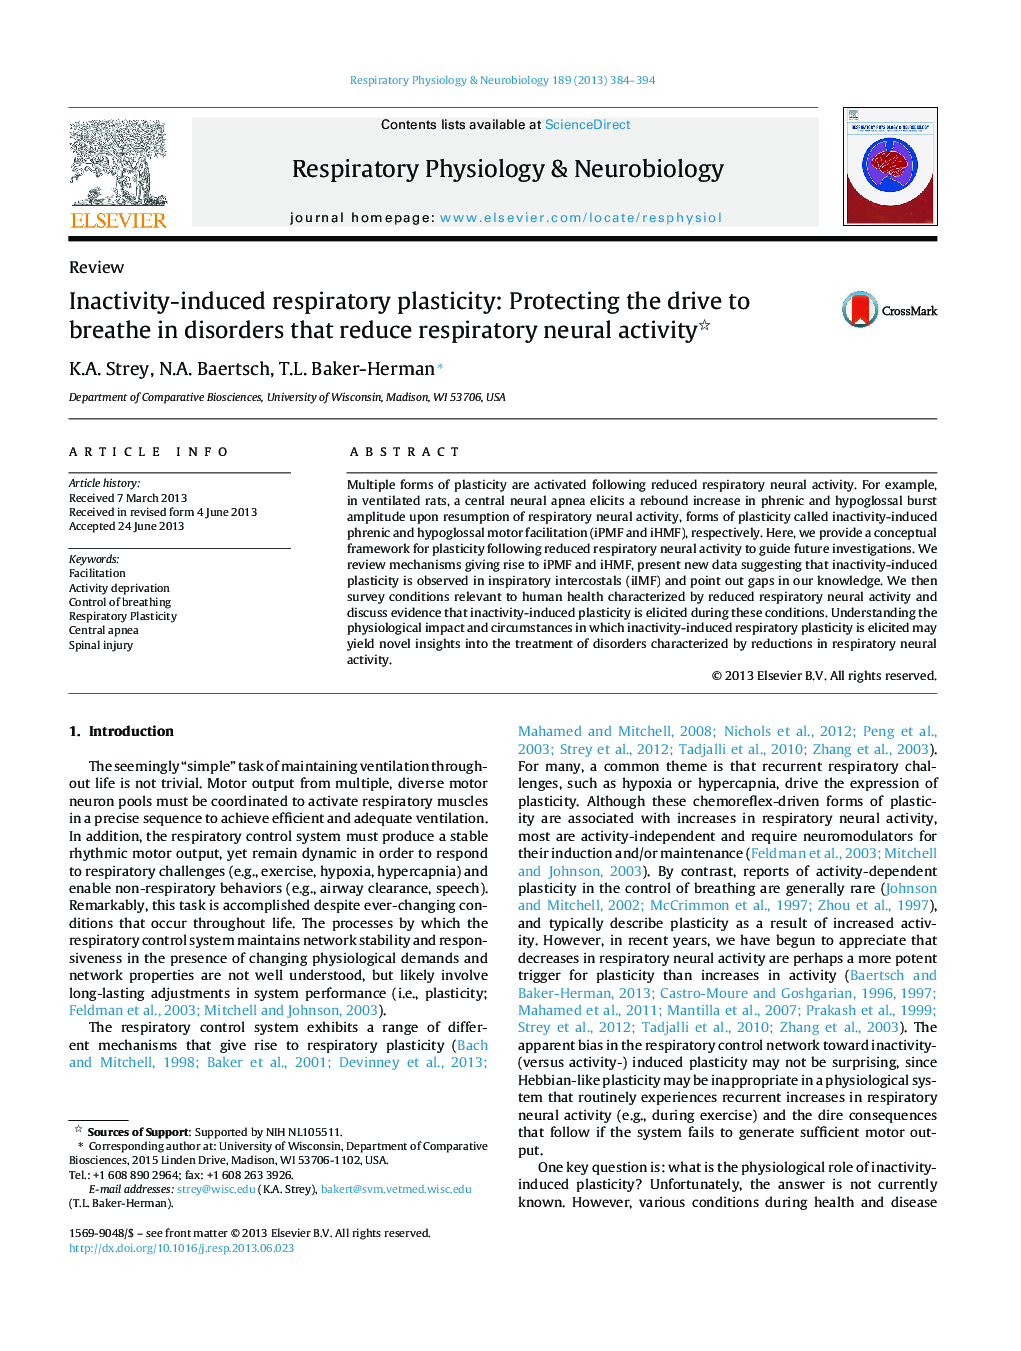 ReviewInactivity-induced respiratory plasticity: Protecting the drive to breathe in disorders that reduce respiratory neural activity